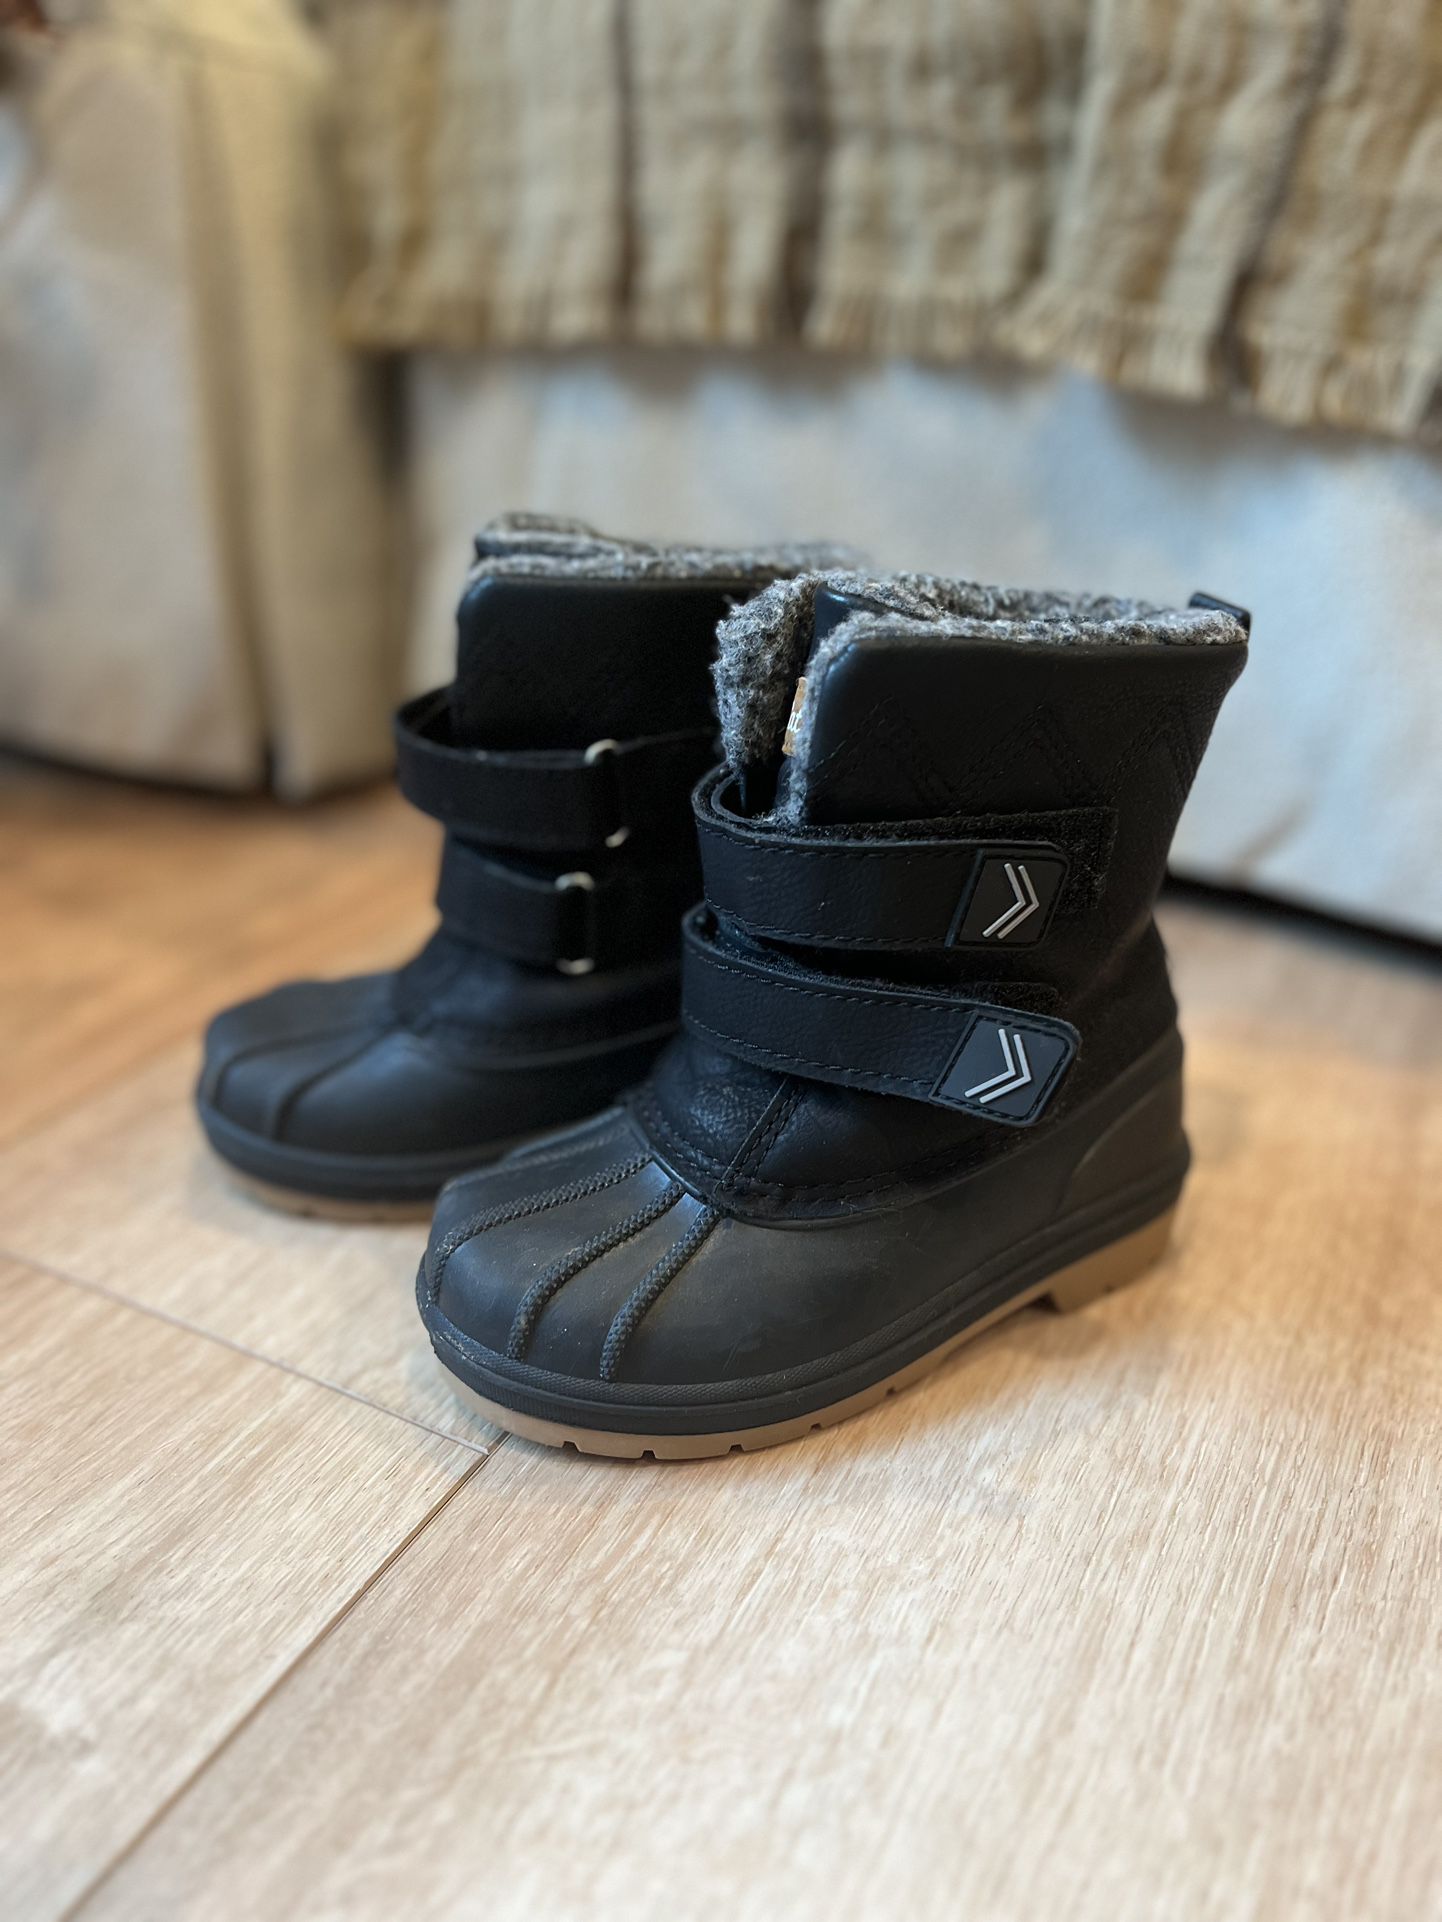 Little Kids Size 9 Cat And Jack Snow boot